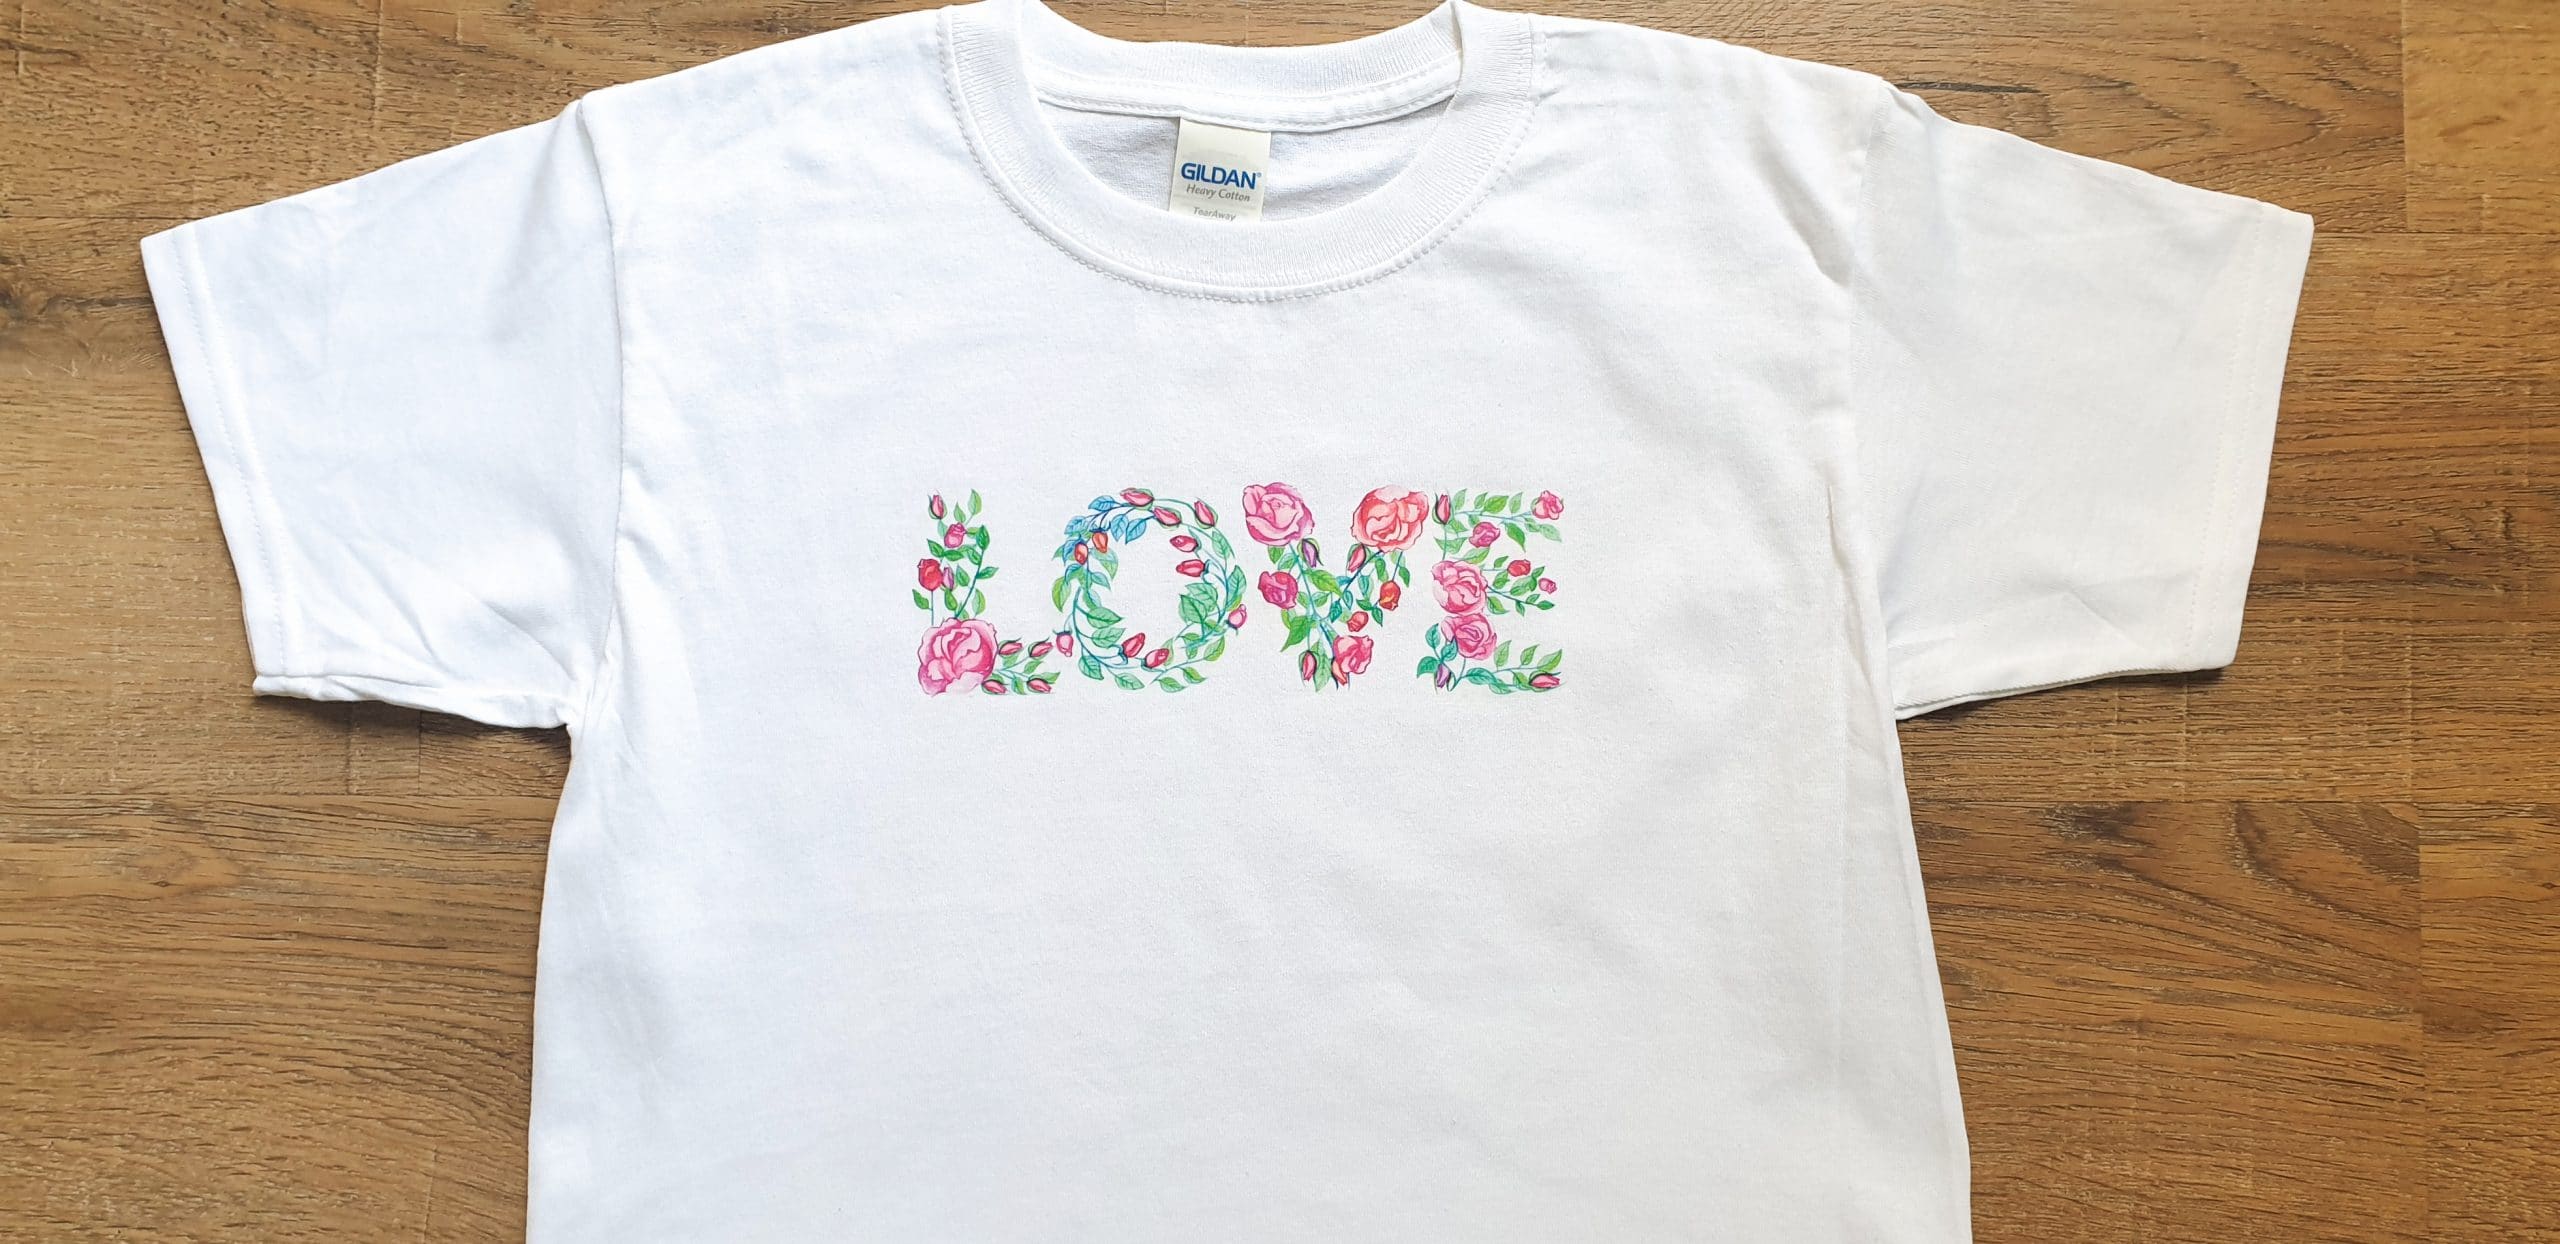 diy t shirt printing with transfer paper